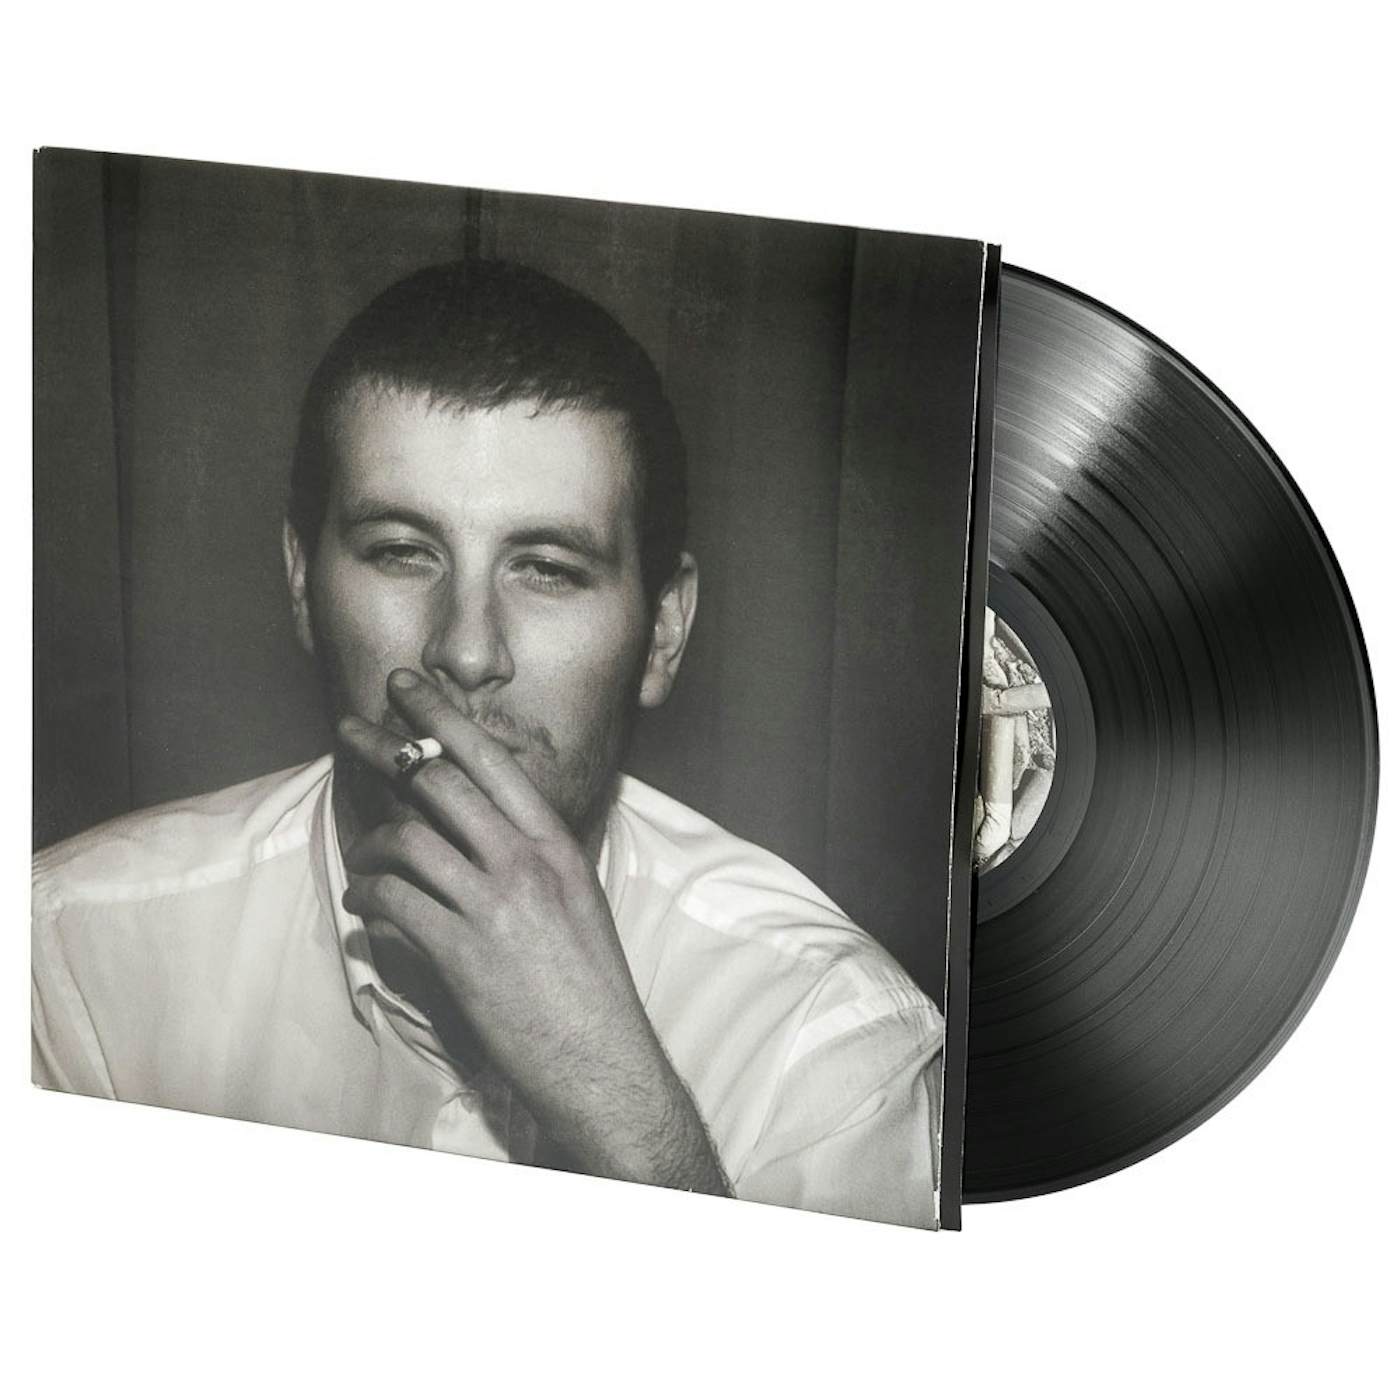 People say first. Arctic Monkeys whatever people say i am, that's what i'm not Vinyl. Винил Arctic Monkeys – whatever people say i am. 2006 - Whatever people say i am, that's what i'm not. Arctic Monkeys Vinyl.